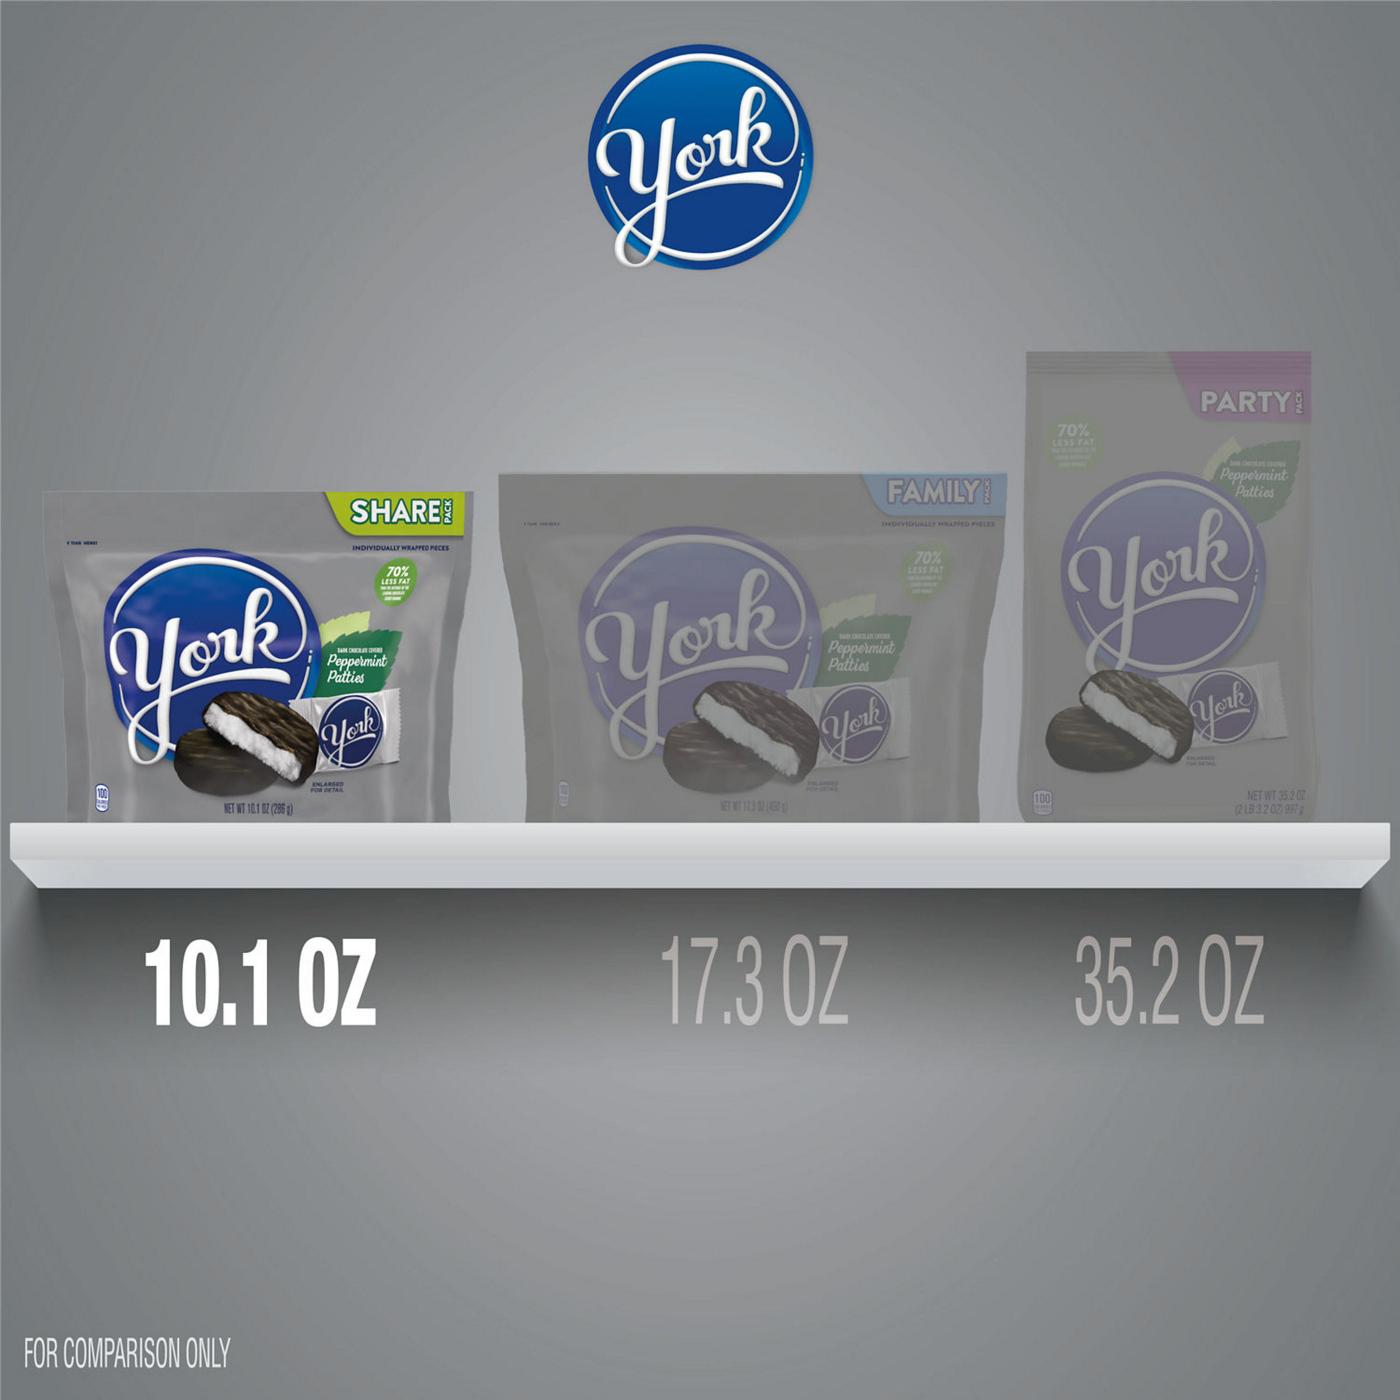 York Dark Chocolate Peppermint Patties Candy - Share Pack; image 5 of 7